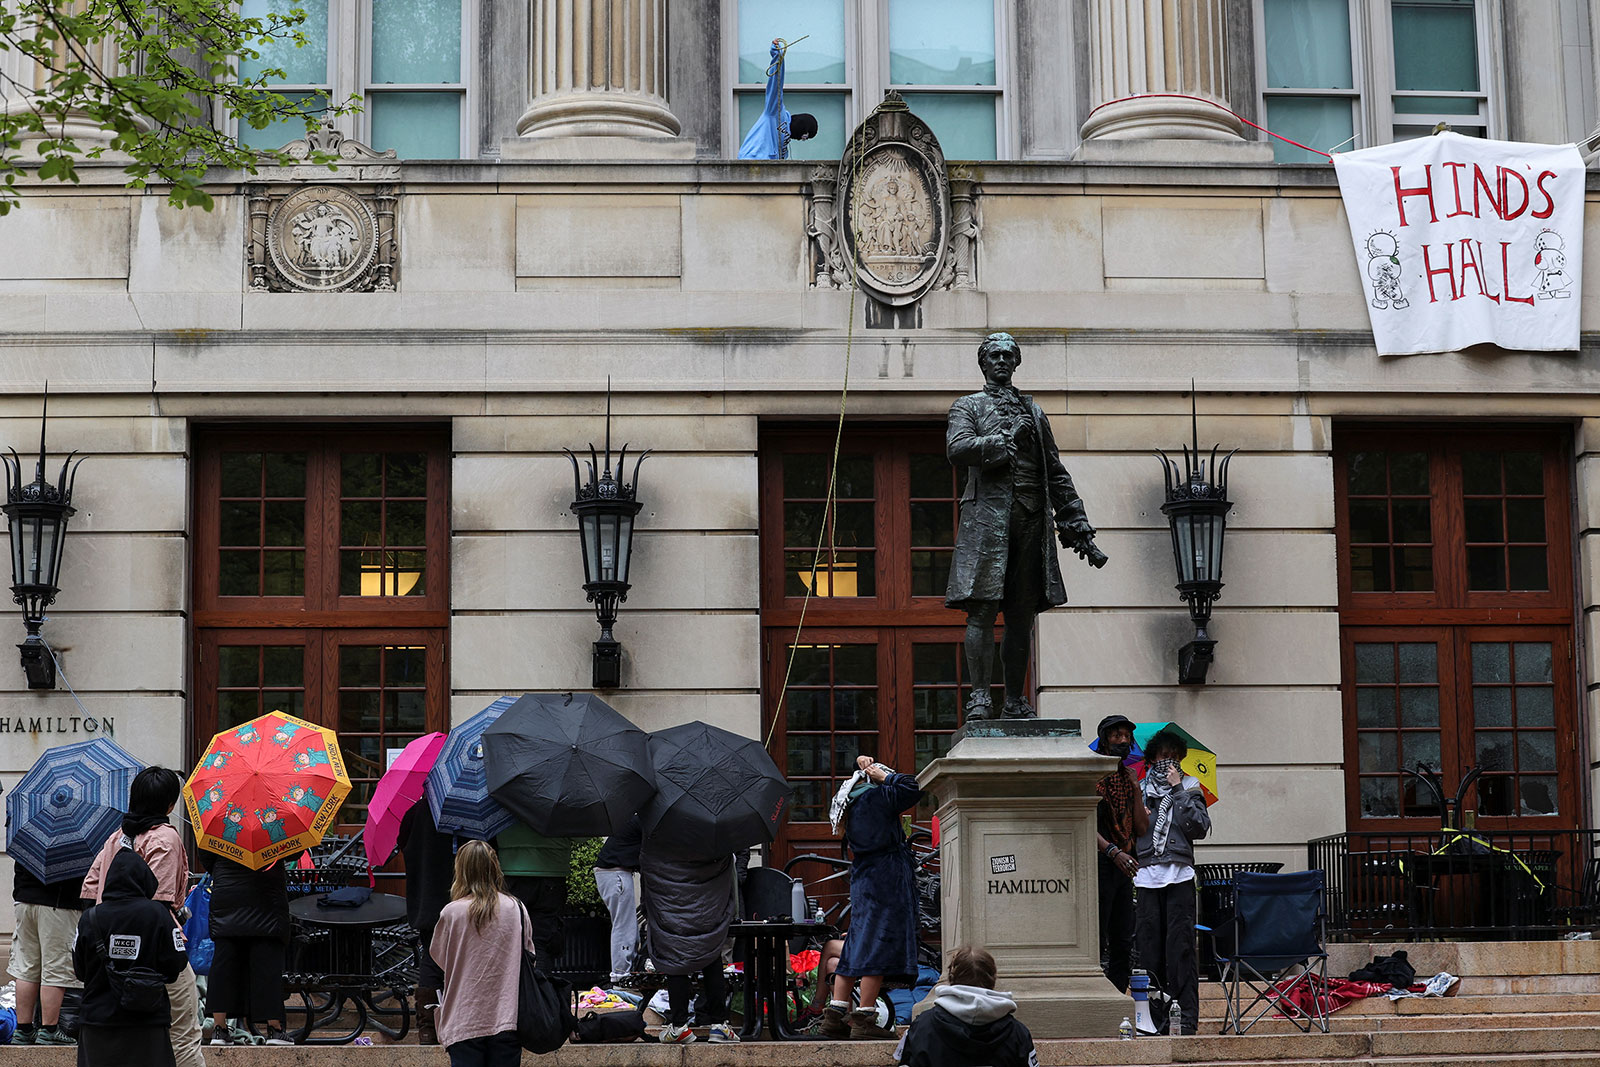 Protesters hold umbrellas as they move supplies into Hamilton Hall in New York on Tuesday.